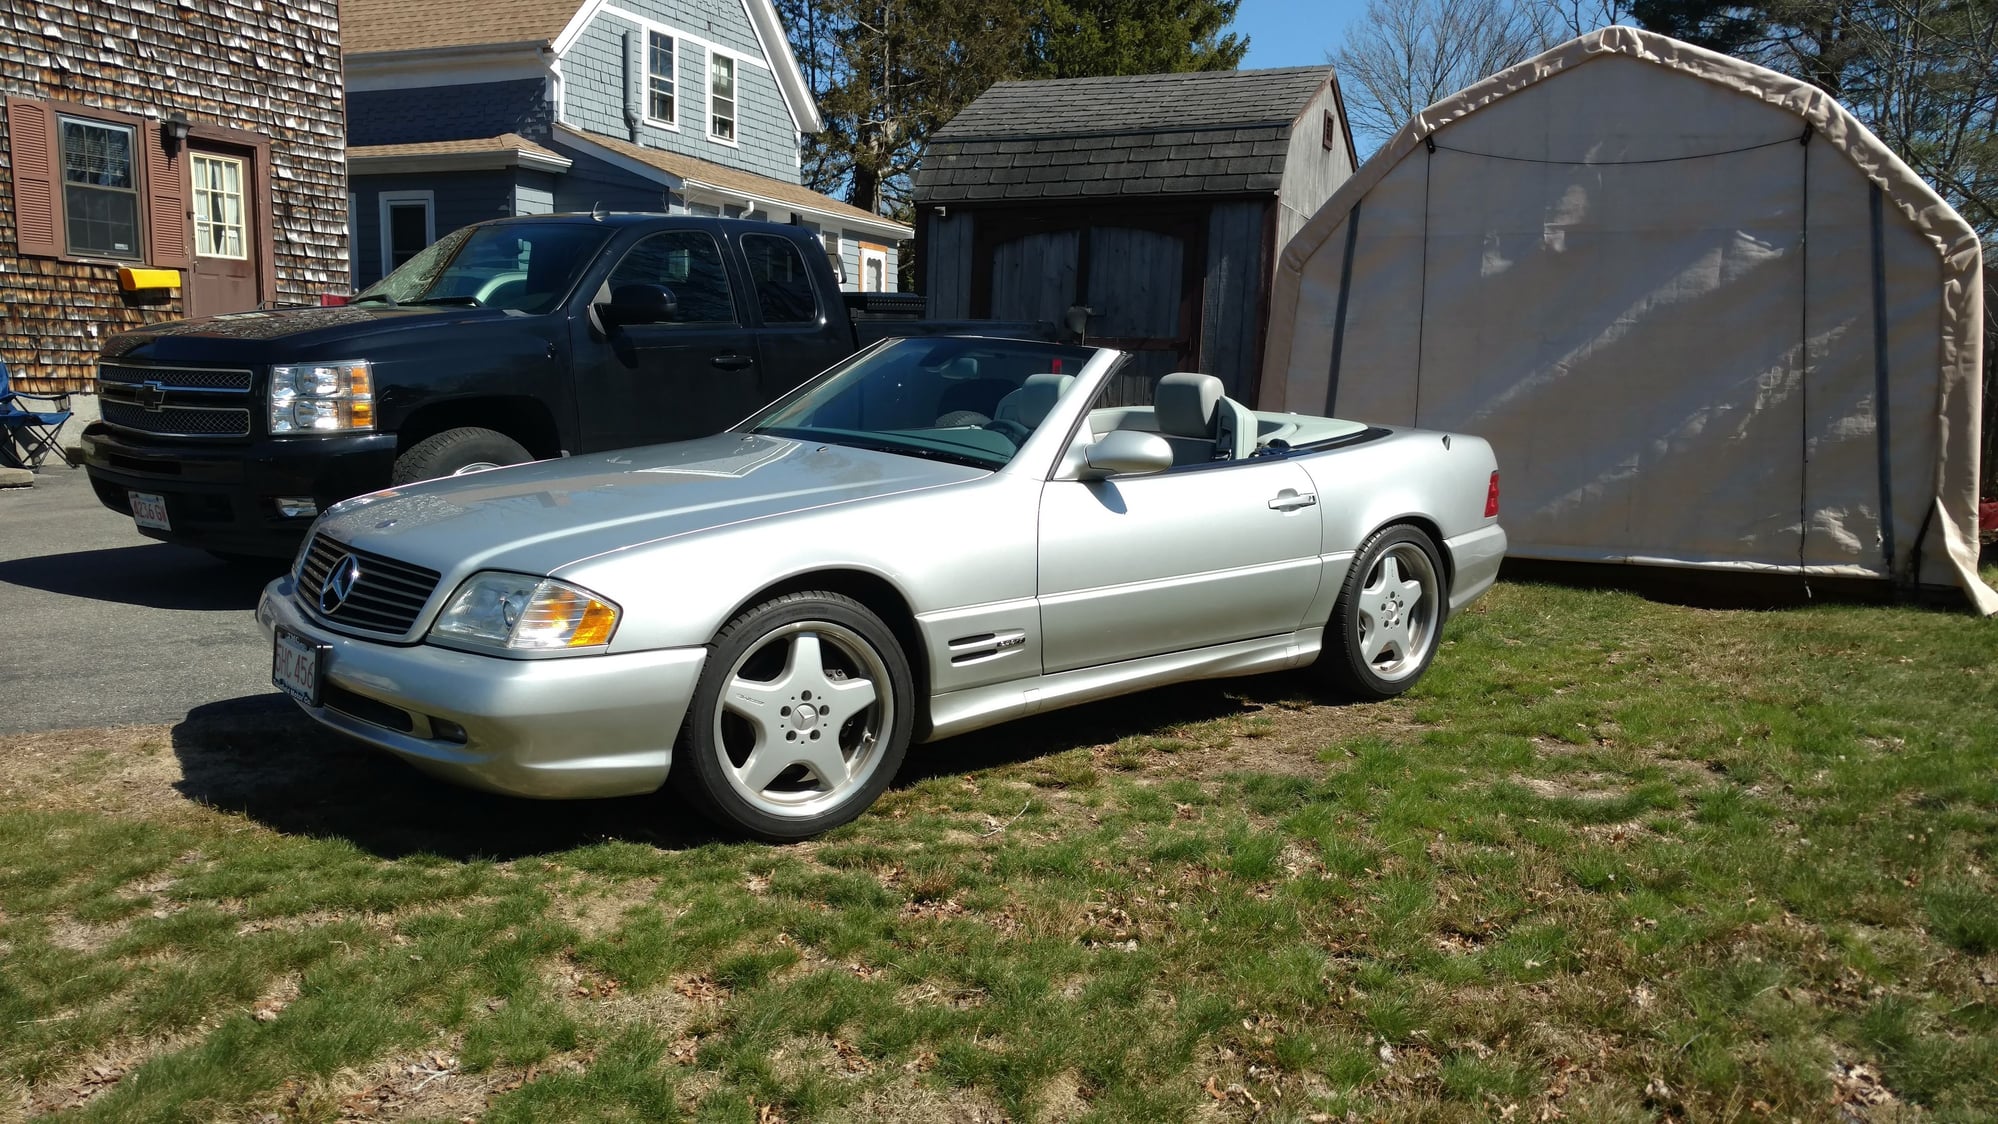 2000 Mercedes-Benz SL500 - 2000 SL500 Sport with Panoramic top included for $10,000 - Used - VIN WDBFA68F1YF191843 - 8 cyl - 2WD - Automatic - Convertible - Silver - Brockton, MA 02302, United States